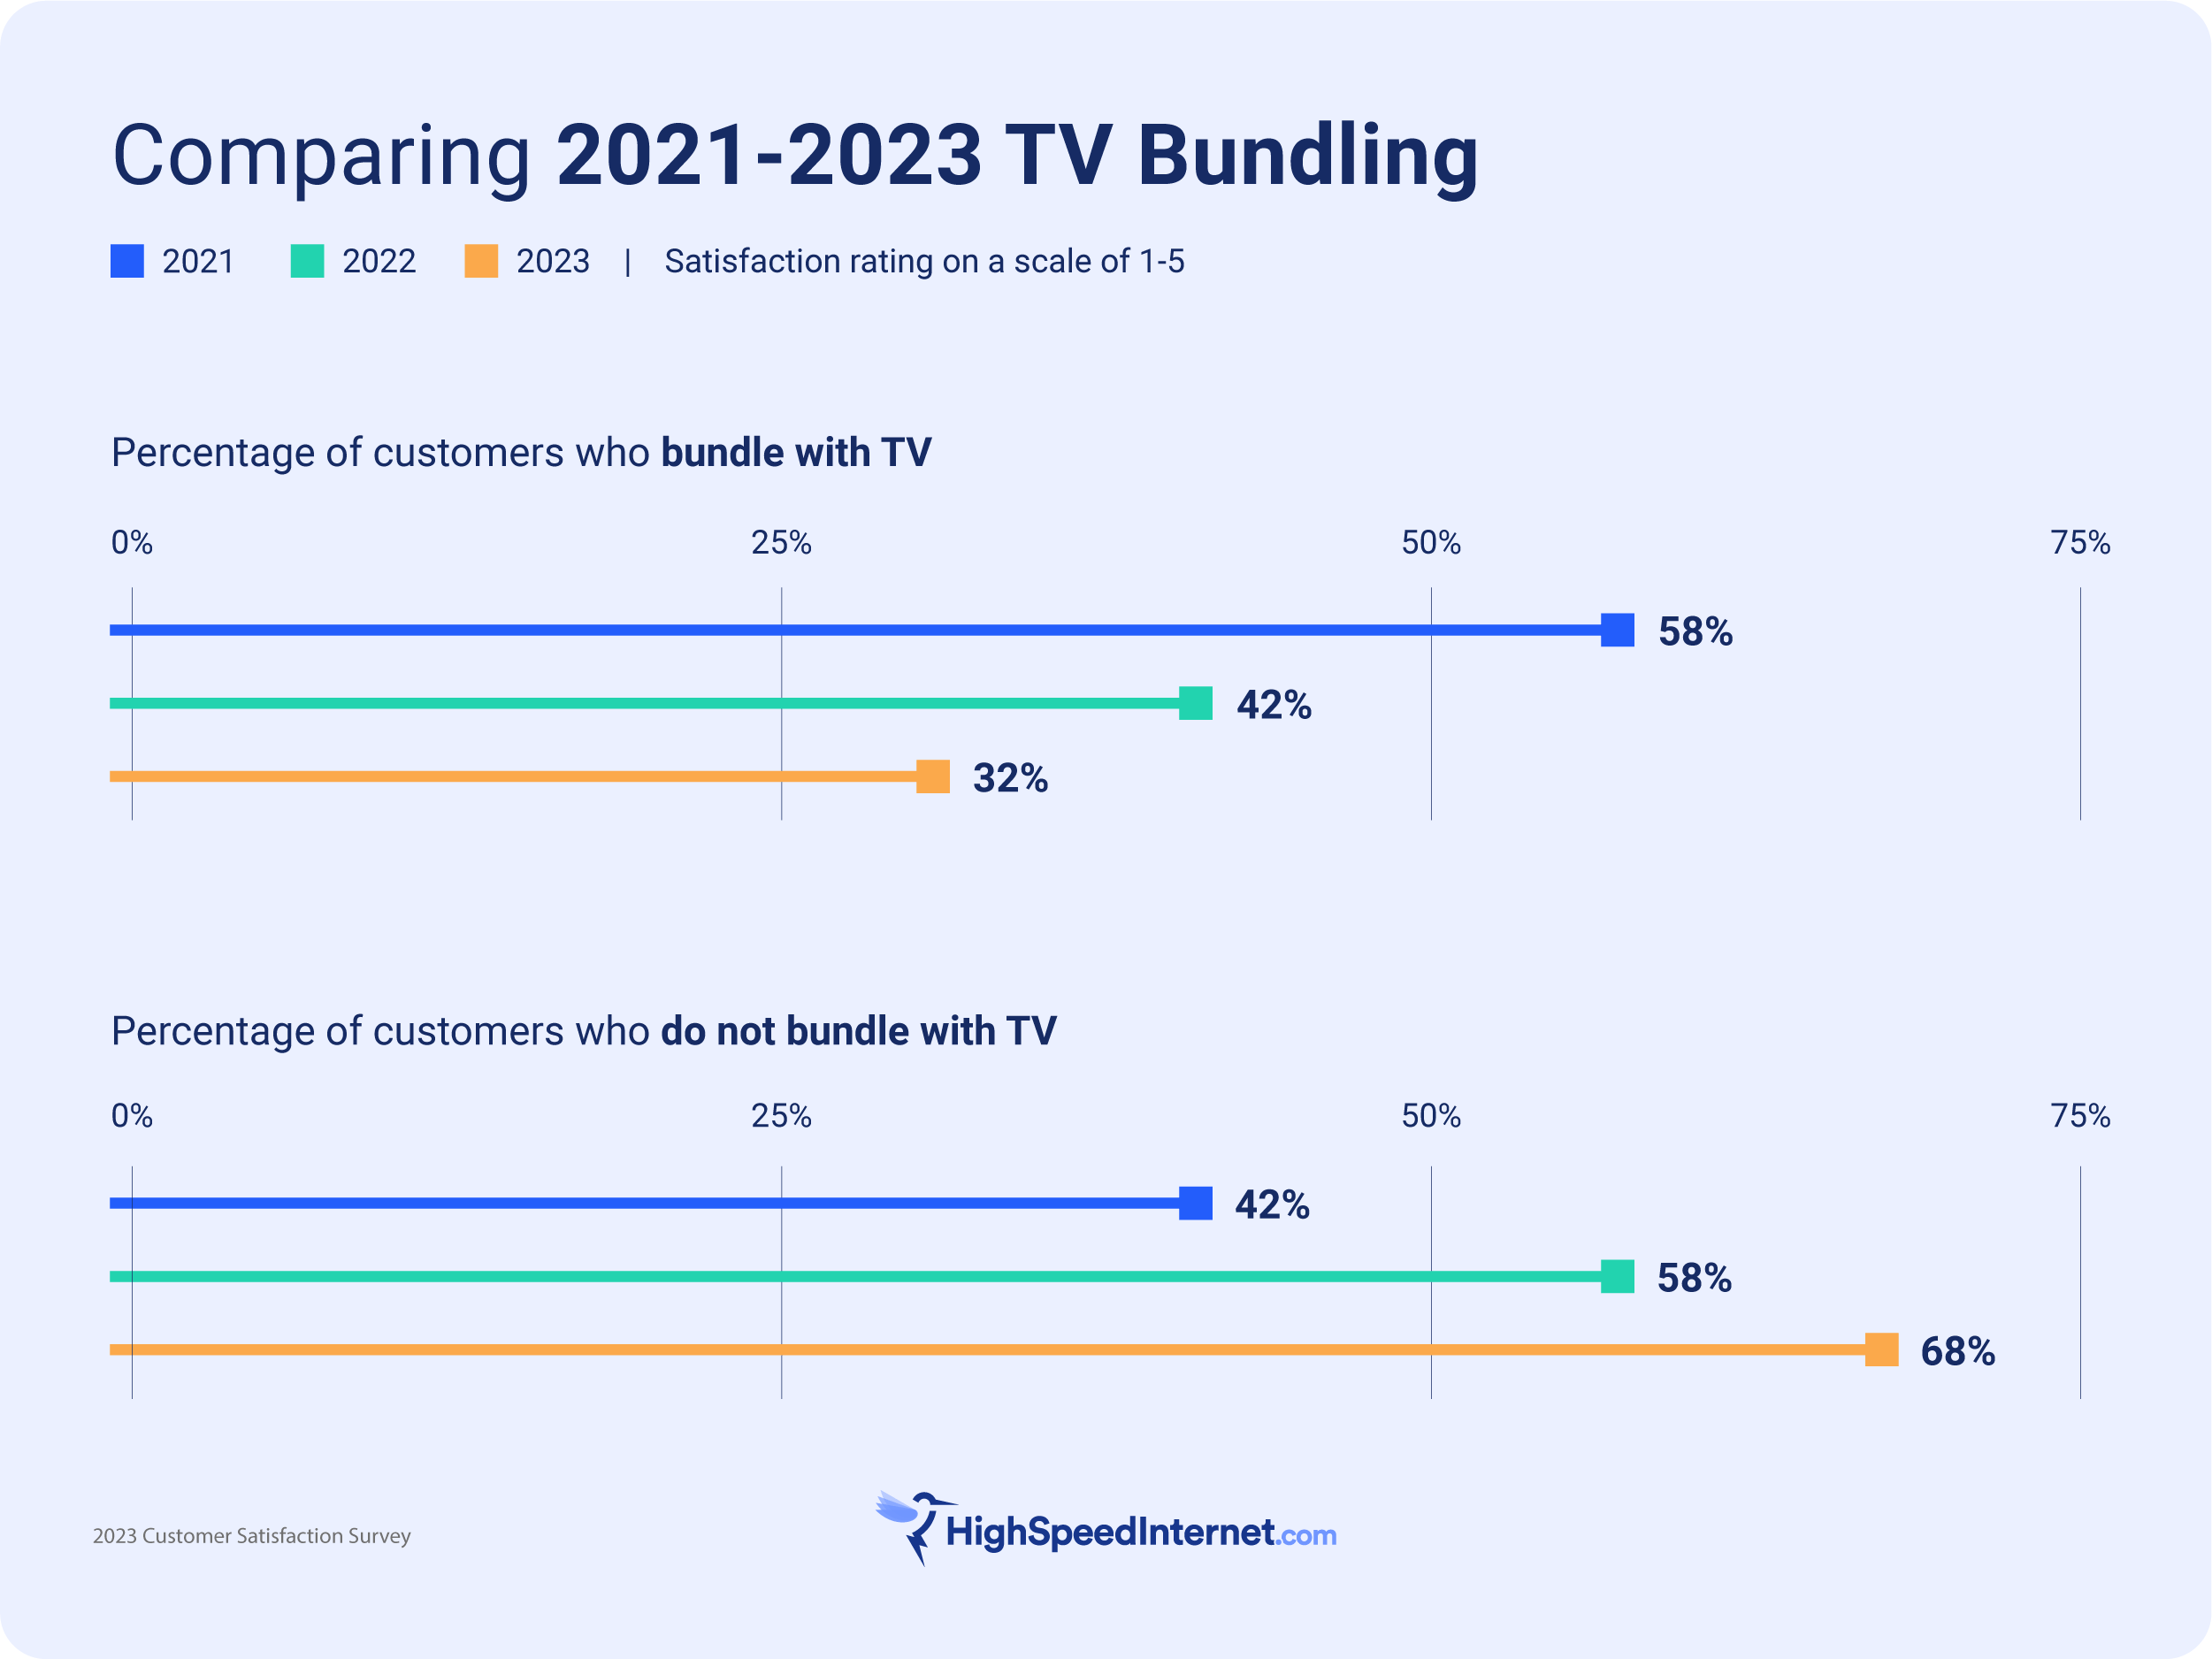 Compared to previous years, more customers are not bundling internet with TV